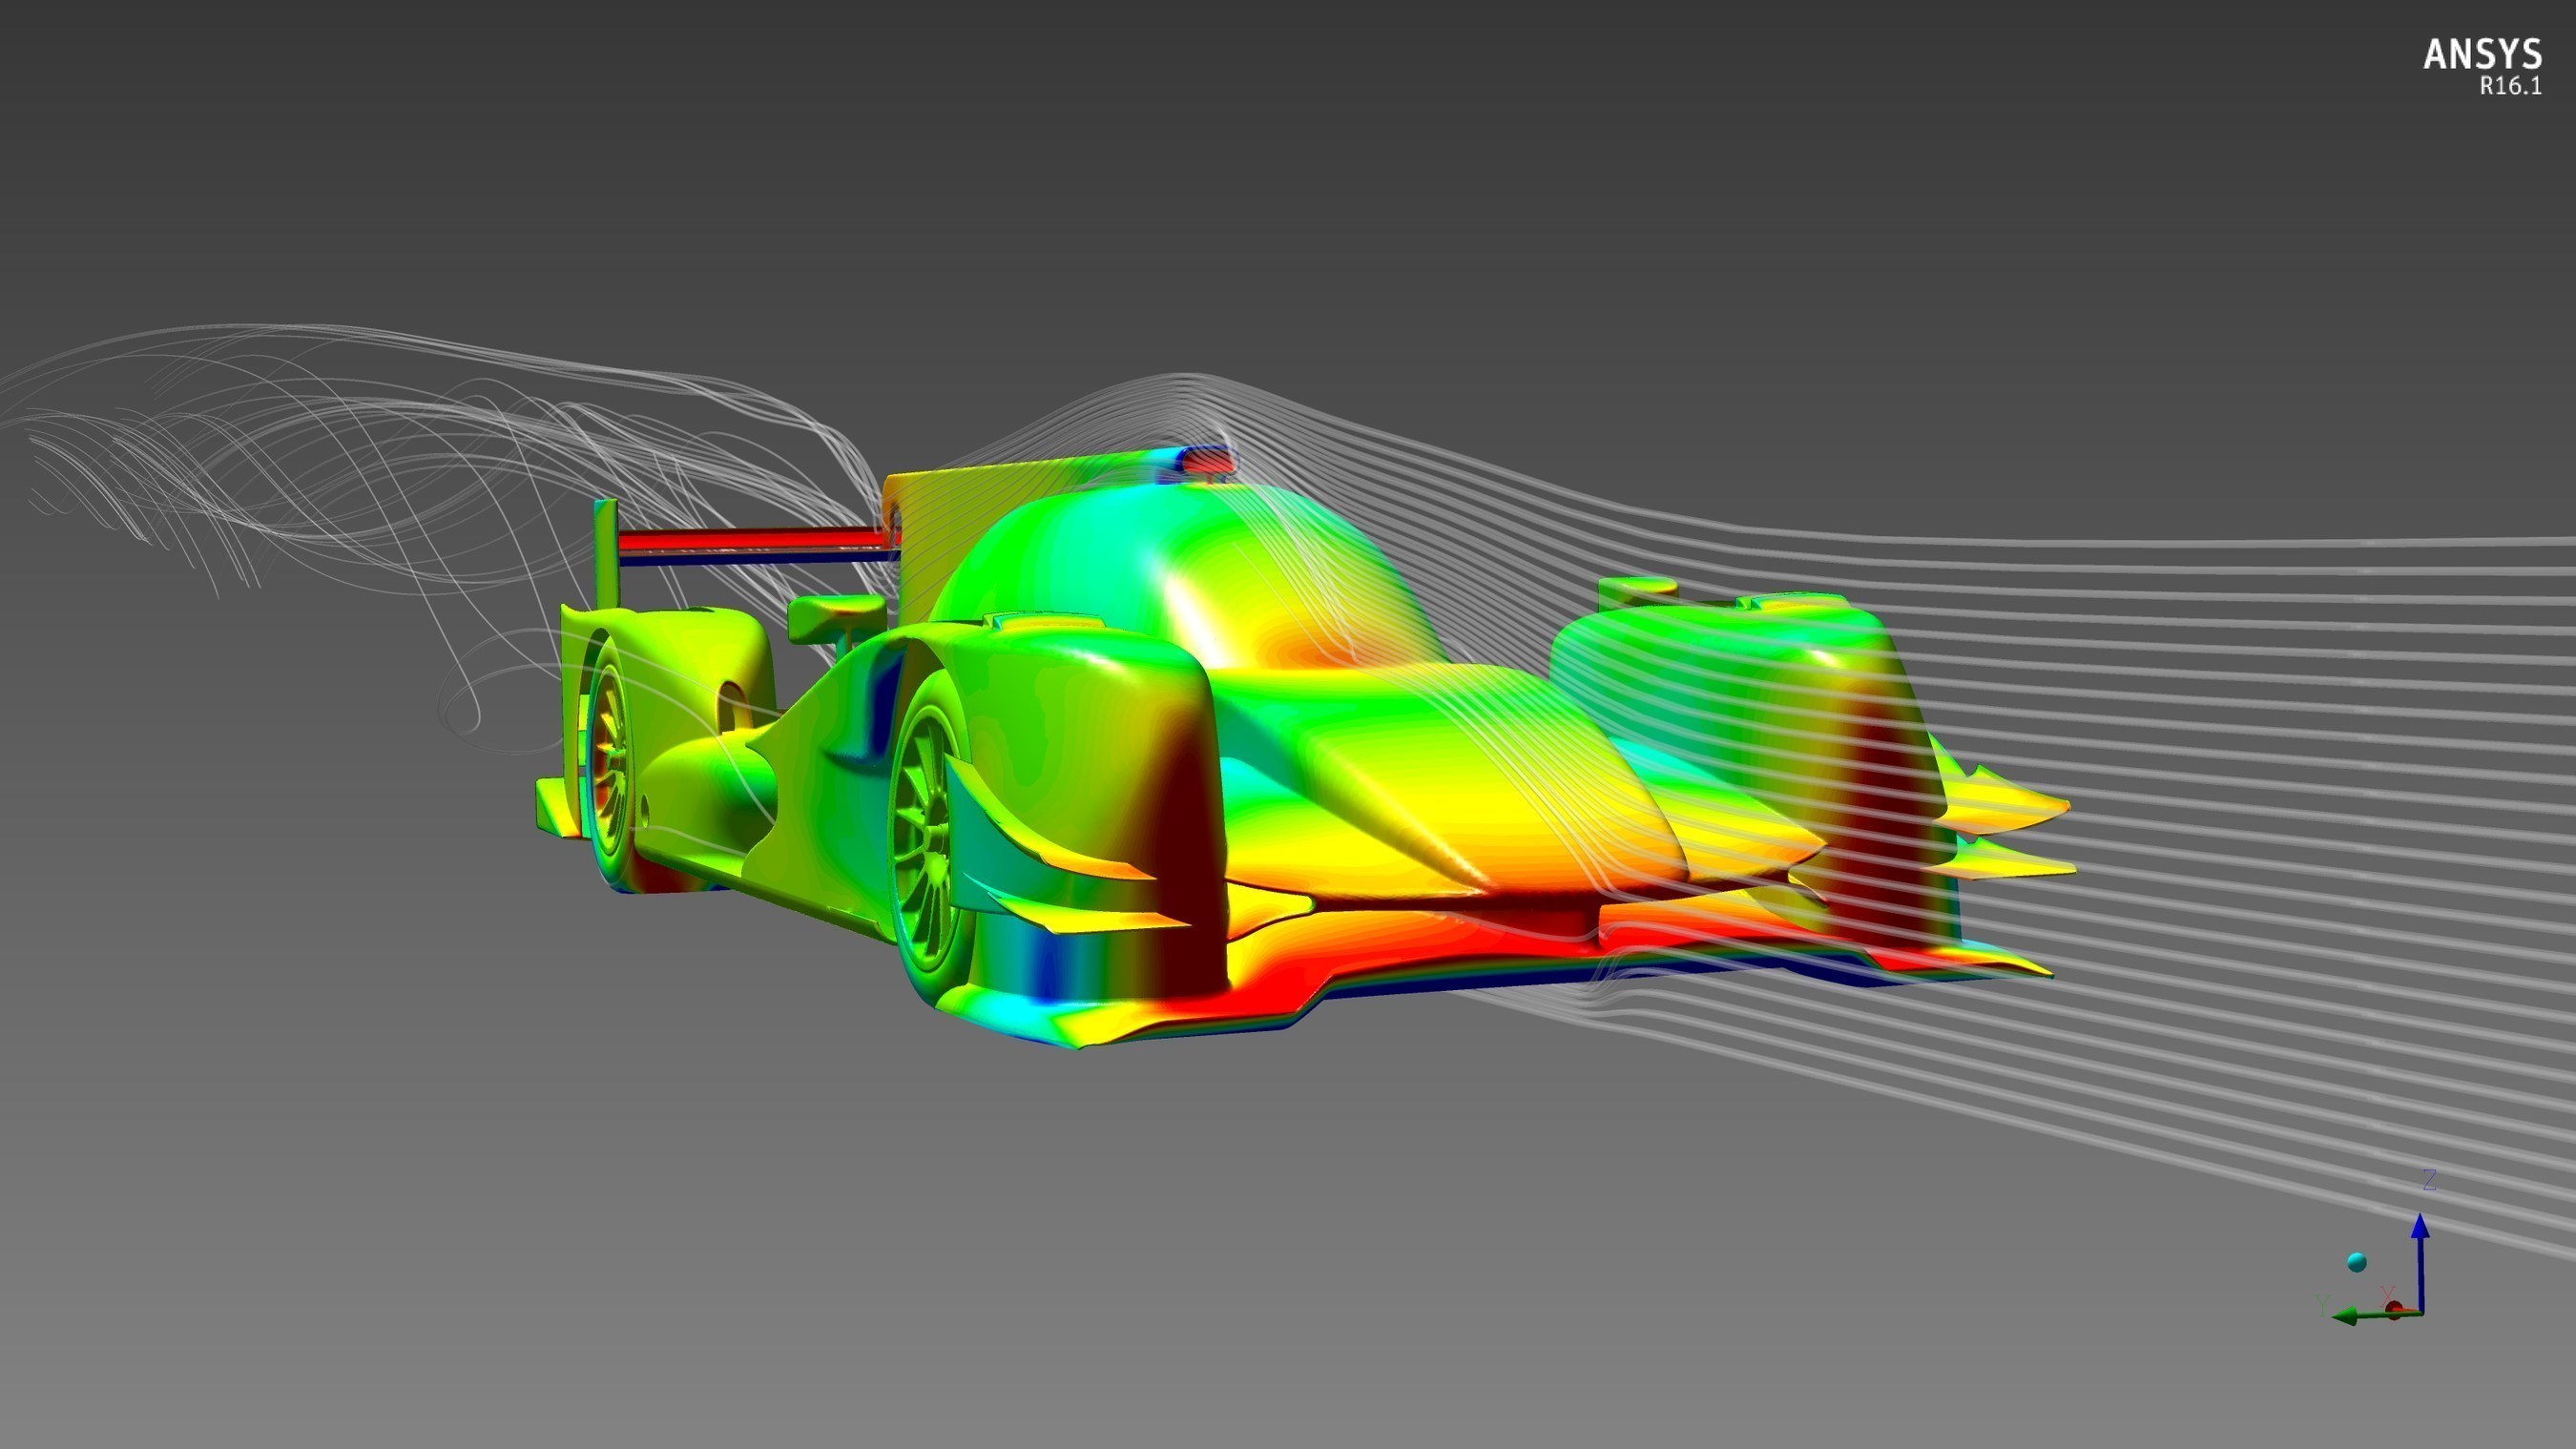 ORECA 05 in the high downforce configuration. ANSYS CFD simulation software displaying the pressure field on the body surface and virtual wind streamlines.